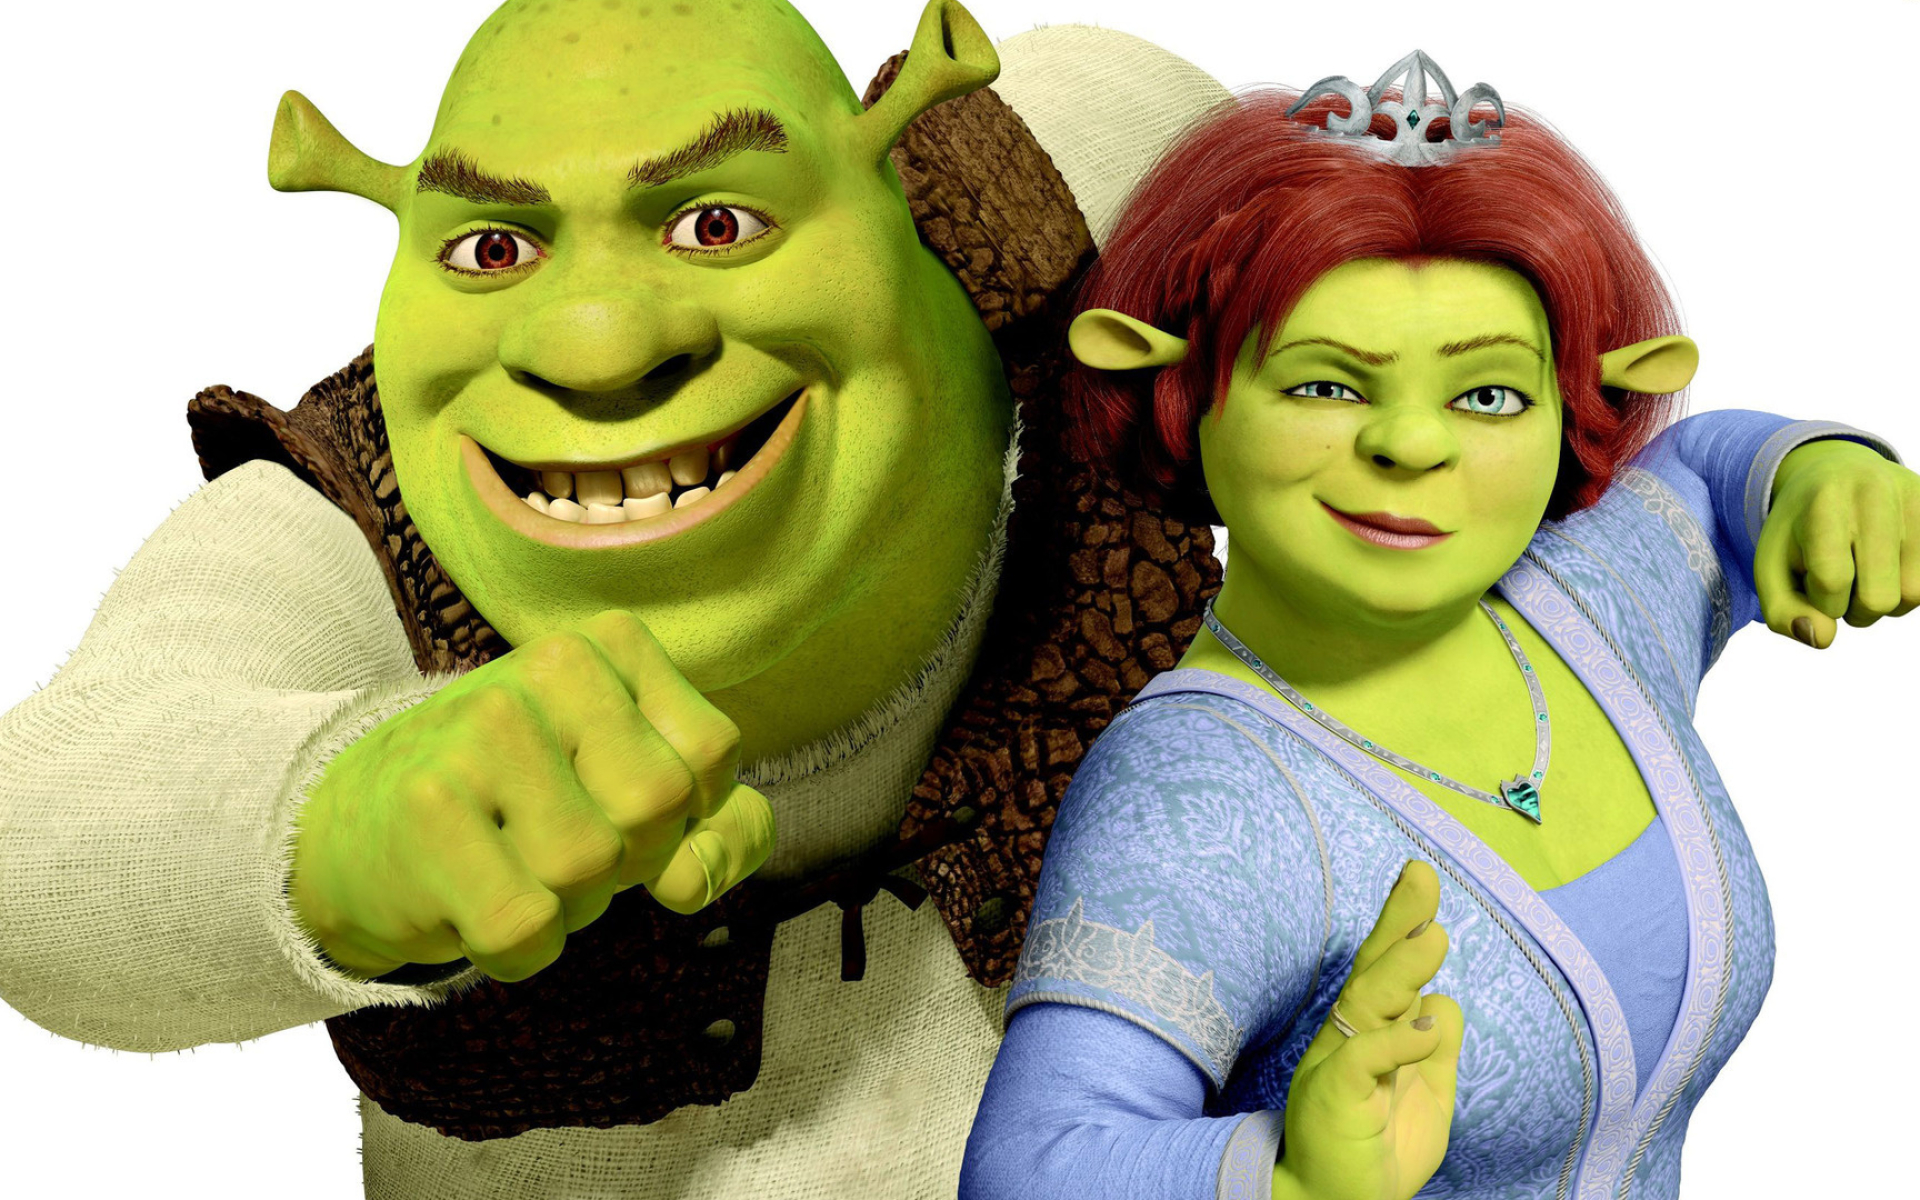 Fiona wallpapers, Shrek 2 movie, Animated characters, Magical moments, 1920x1200 HD Desktop